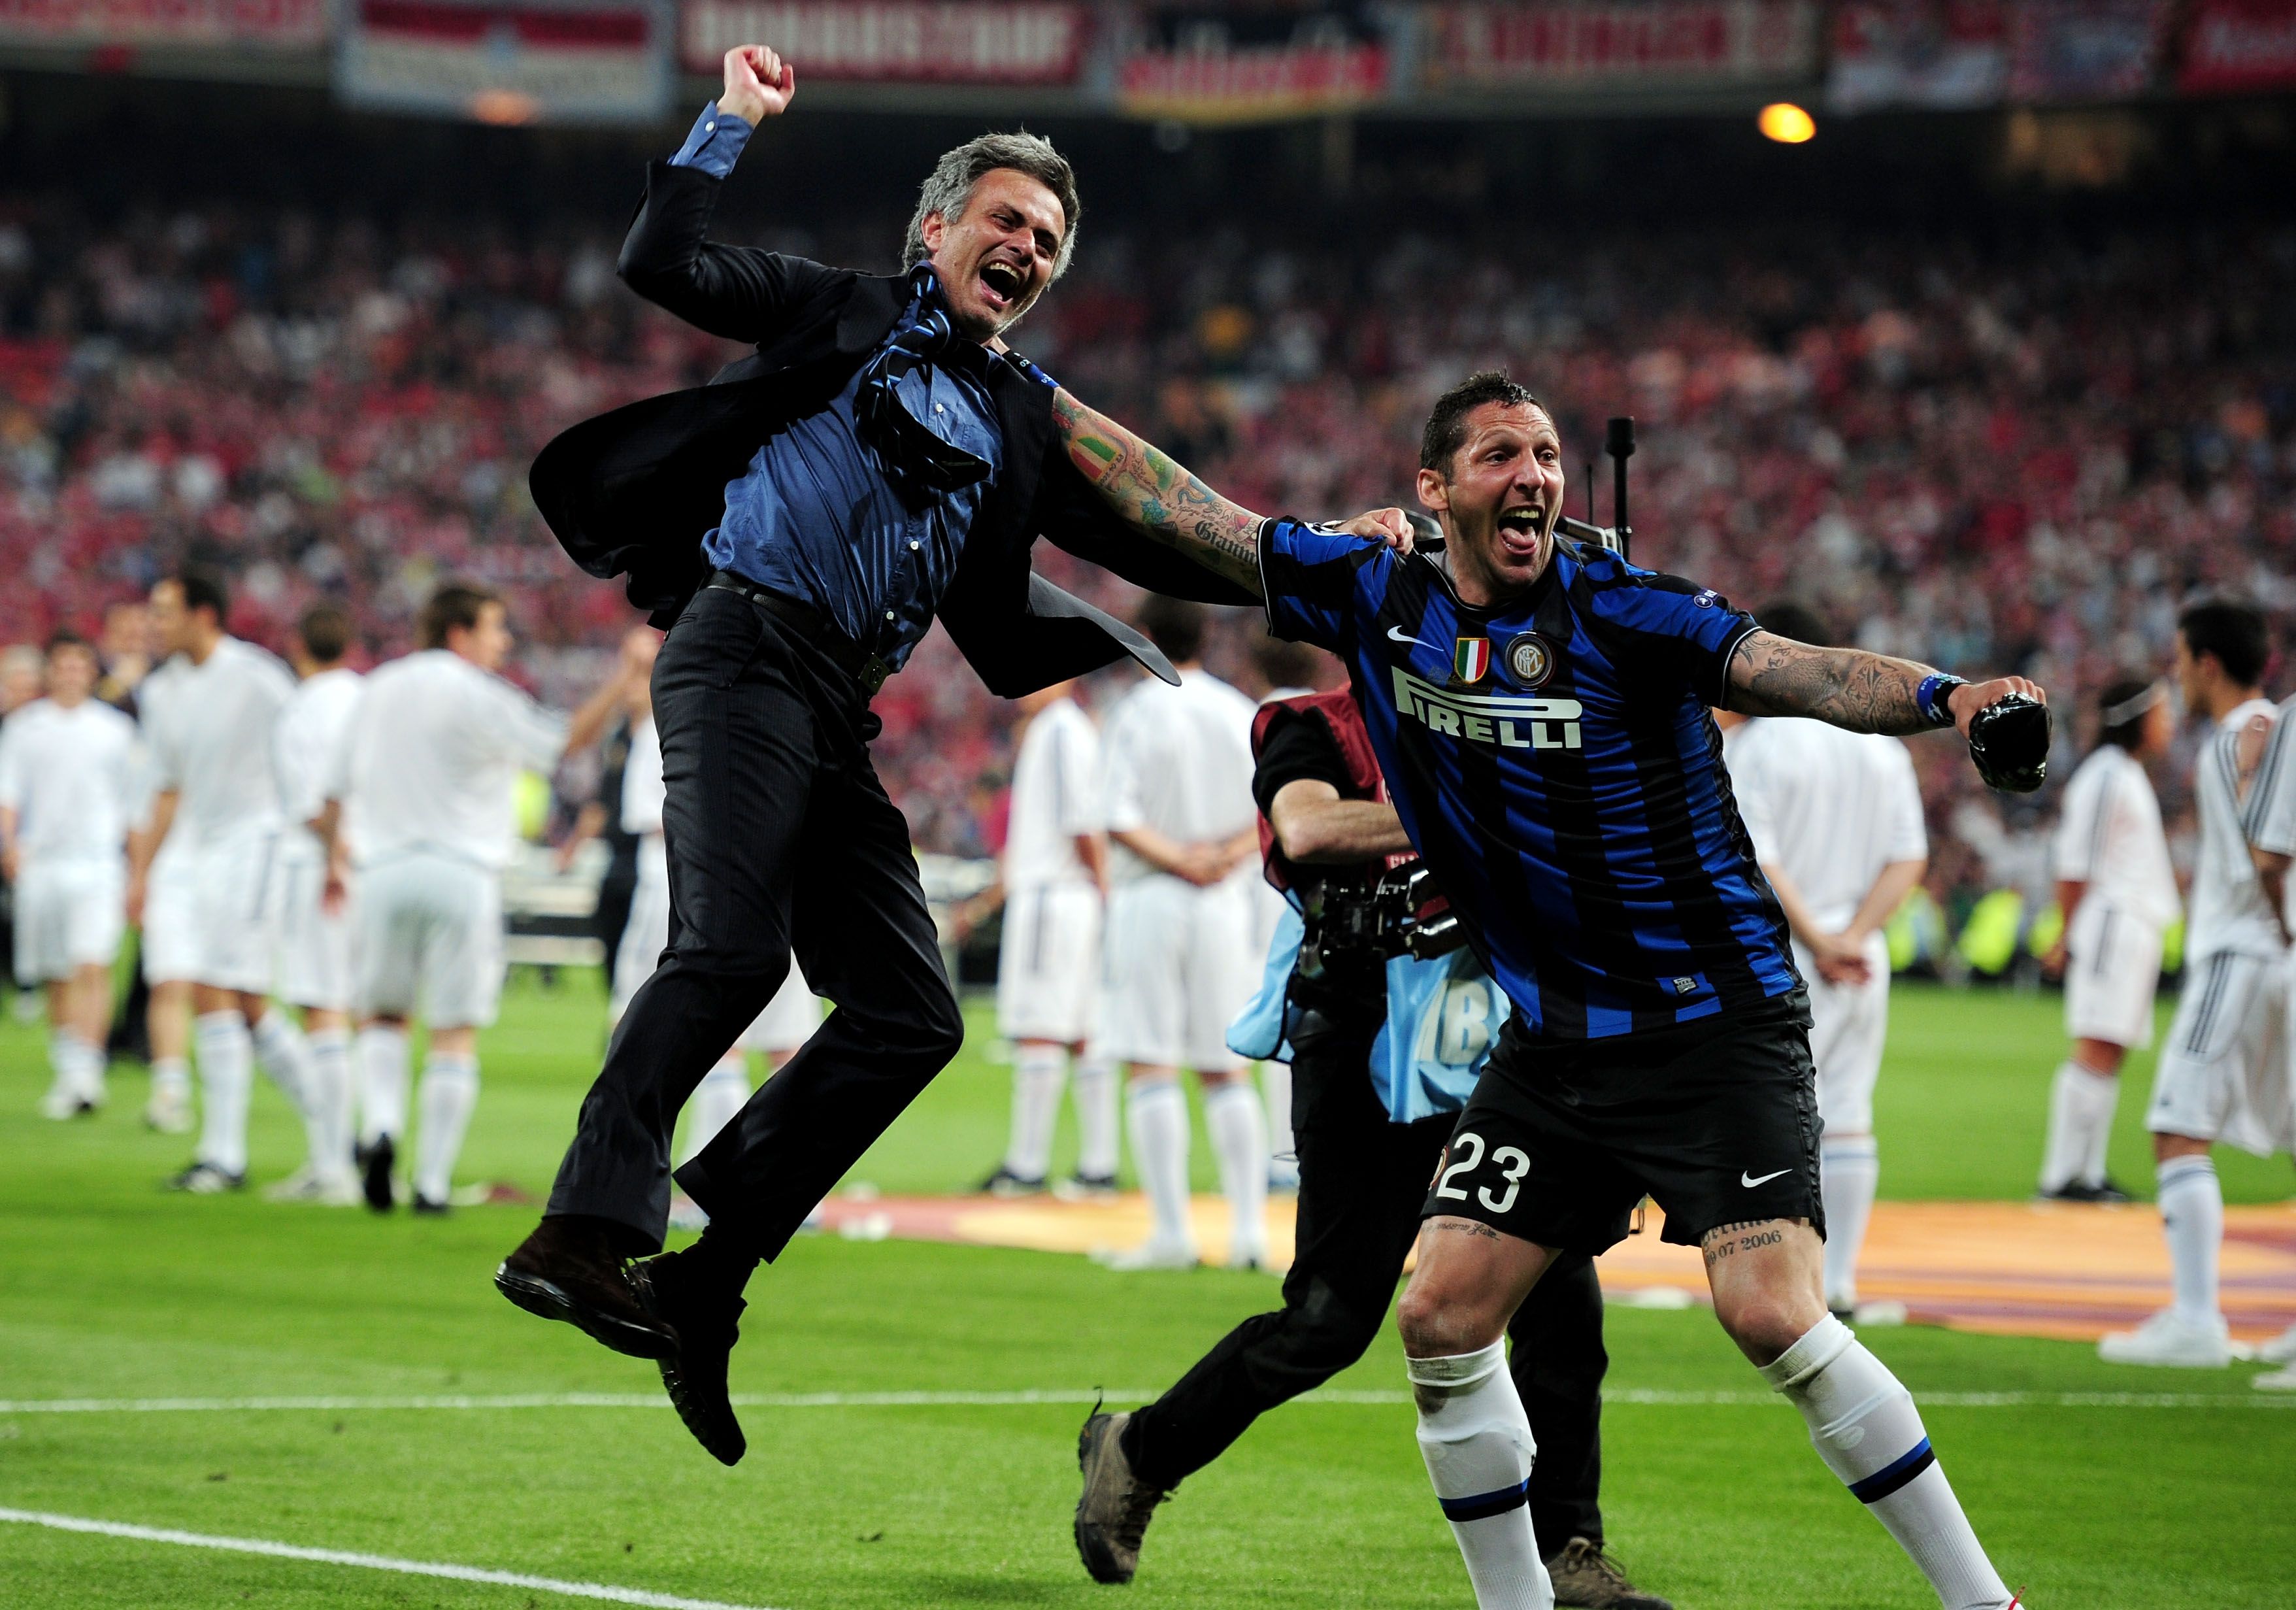 Inter's Champions League campaign was strong